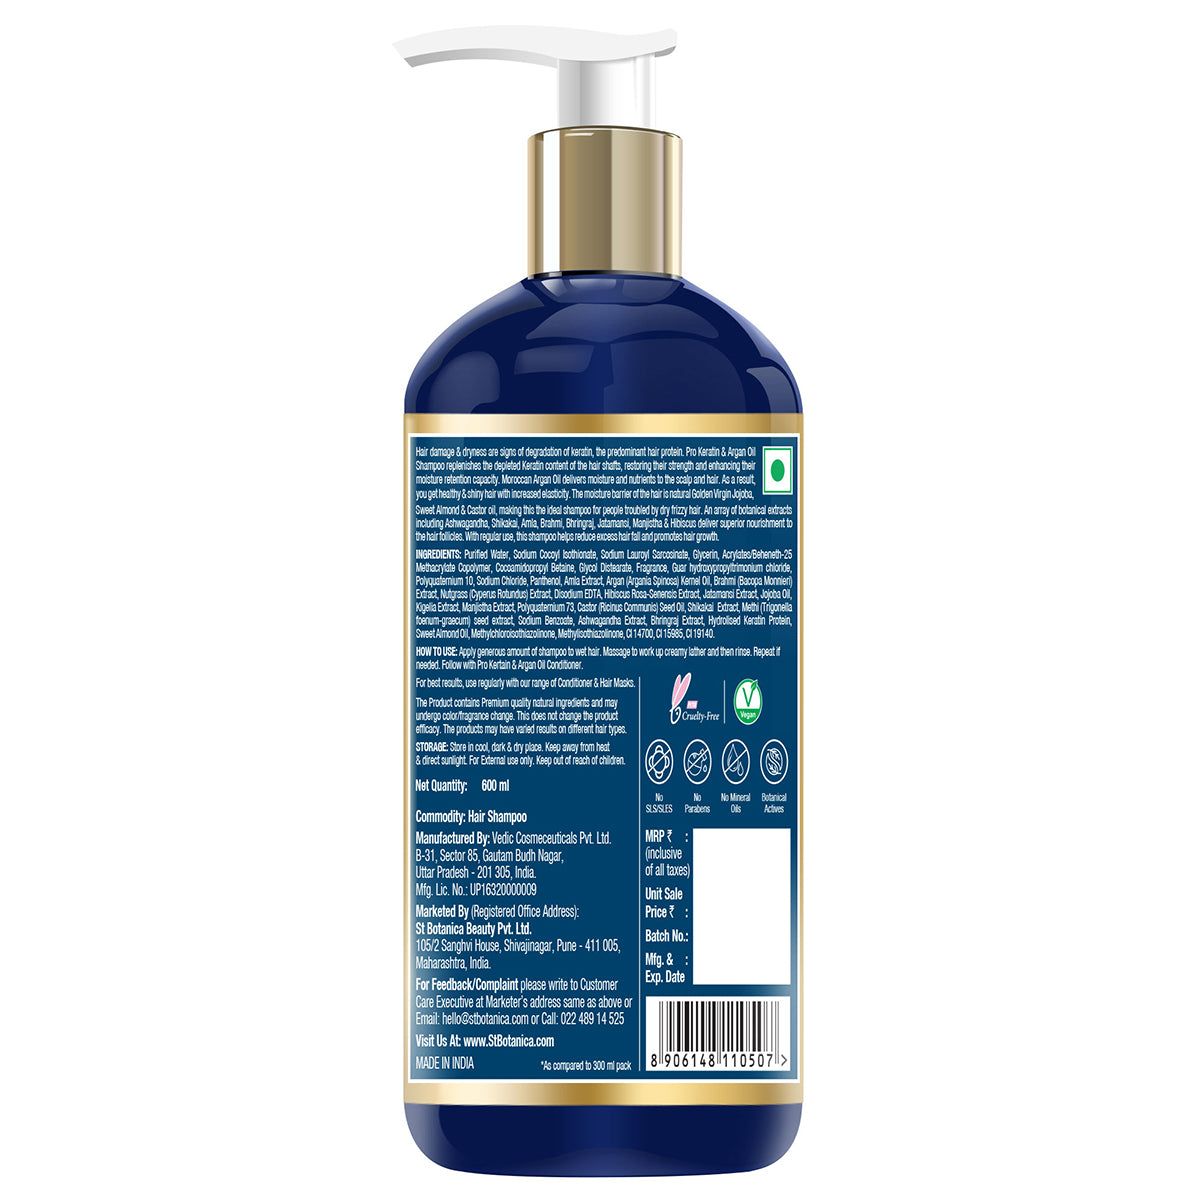 St.Botanica Pro Keratin & Argan Oil Smooth Therapy Shampoo 600ml infused with Pro Keratin & Argan Oil that Smoothens and Hydrates Frizzy Hair | Cruelty Free & Vegan | Paraben Free